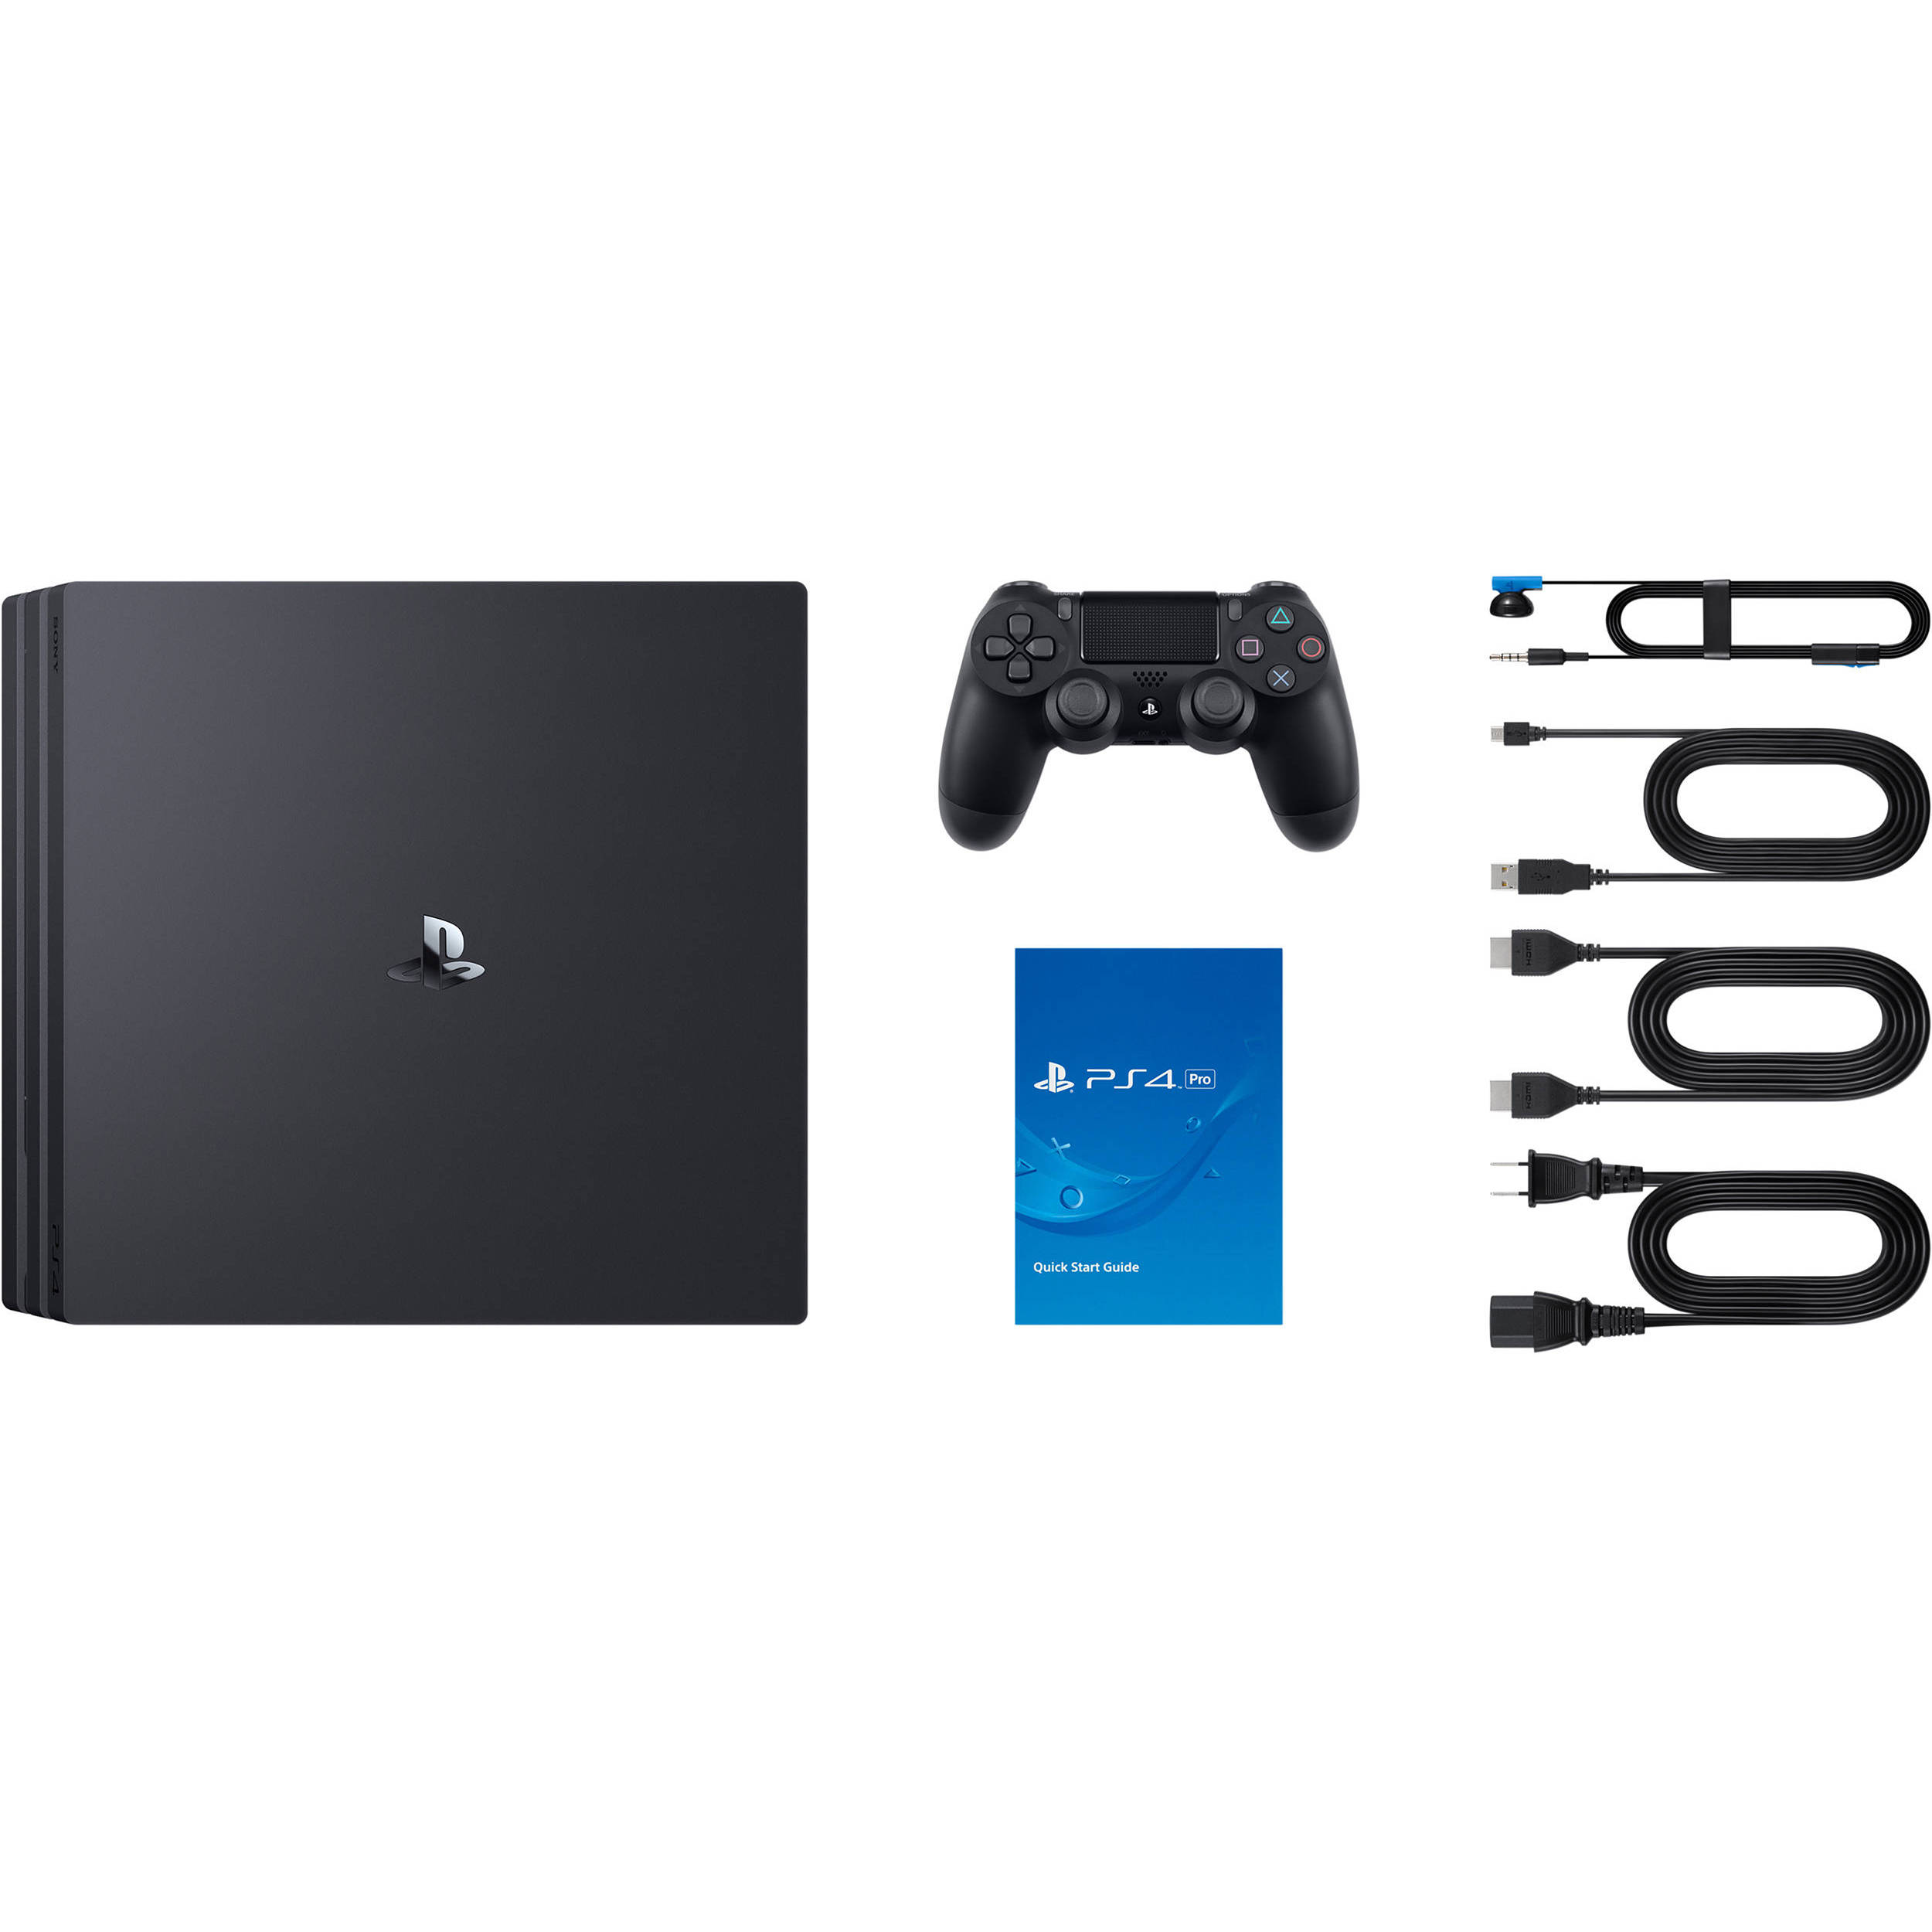 ps4 pro and call of duty bundle